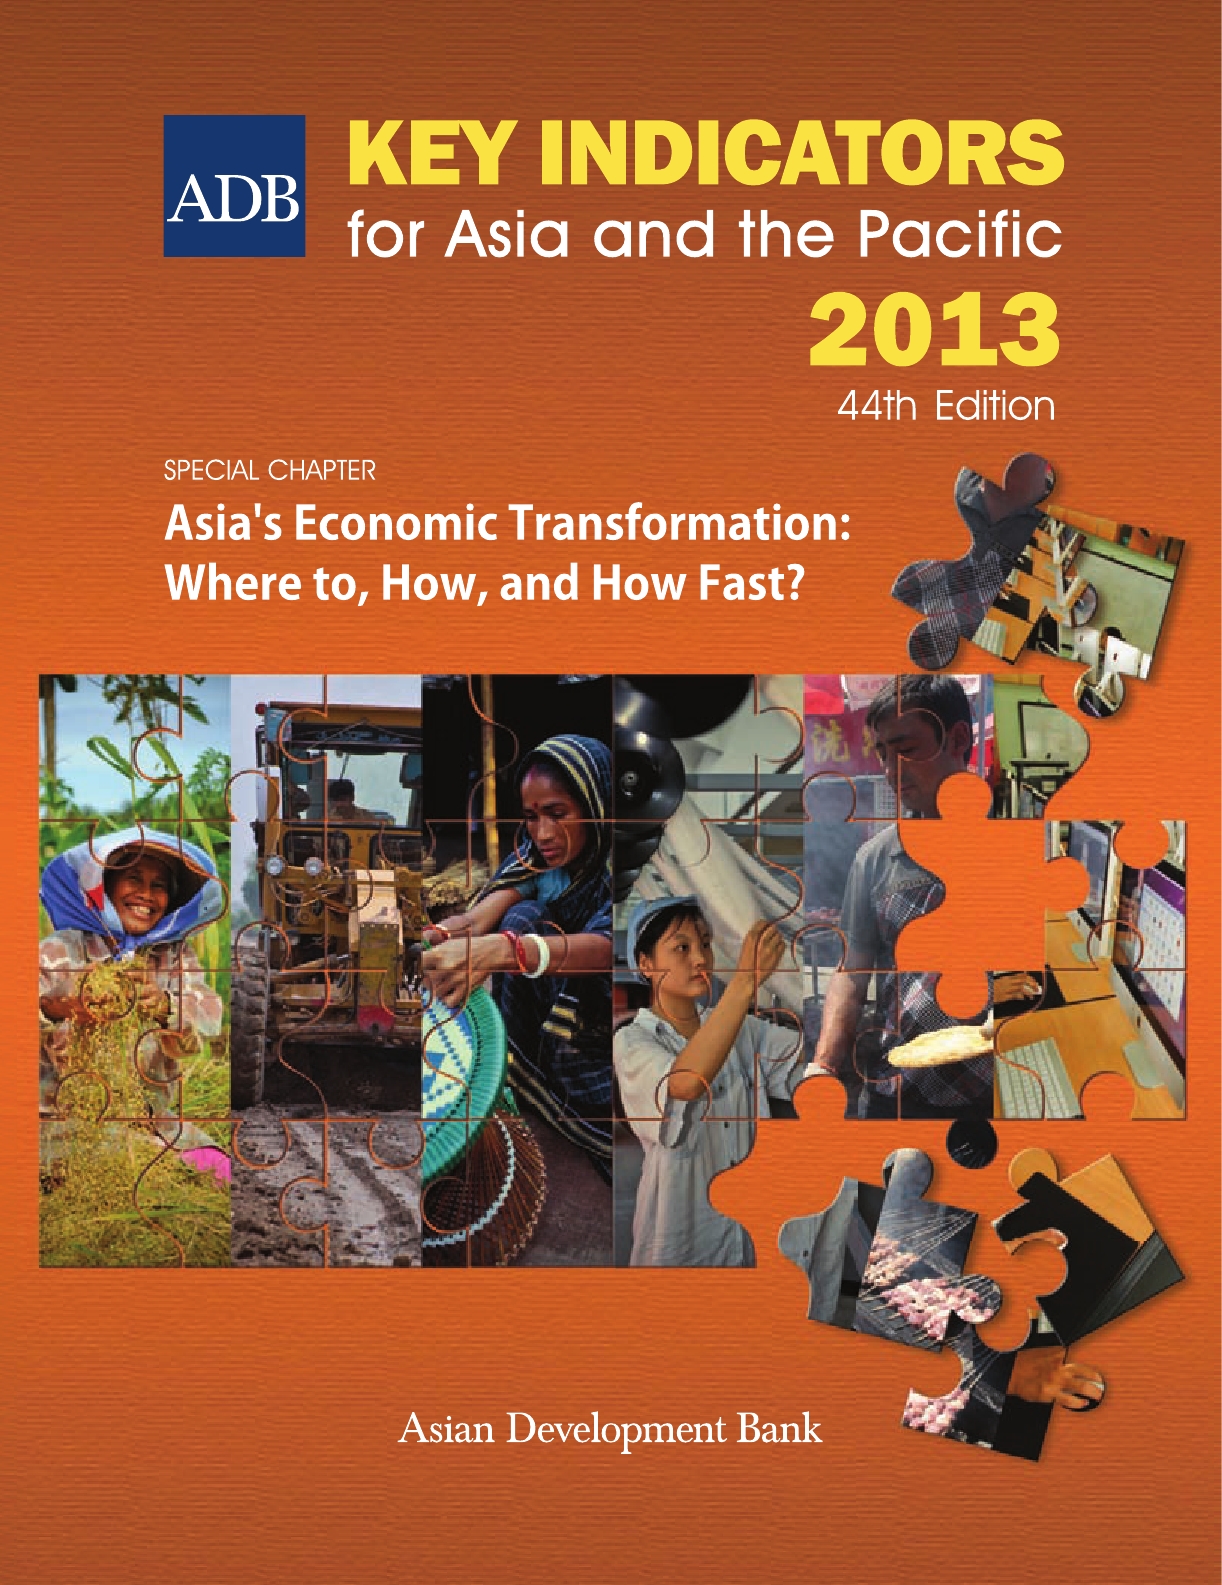 <p style="margin-bottom: 1.5em; padding: 0px;">The&nbsp;Key Indicators for Asia and the Pacific 2013 (Key Indicators), the 44th edition of this series, includes the latest available economic, financial, social, and environmental indicators for the 48 regional members of the Asian Development Bank (ADB). This publication aims to present the latest key statistics on development issues concerning the economies of Asia and the Pacific to a wide audience, including policy makers, development practitioners, government officials, researchers, students, and the general public. Part I of this issue of the Key Indicators is a special chapter—“Asia’s Economic Transformation: Where to, How, and How Fast?”. Parts II and III comprise of brief, non-technical analyses and statistical tables on the Millennium Development Goals (MDGs) and seven other themes. This year, the 2013 edition of the&nbsp;<a href="http://www.adb.org/publications/framework-inclusive-growth-indicators-2013-key-indicators-asia-and-pacific" style="margin: 0px; padding: 0px;">Framework of Inclusive Growth Indicators</a>, a special supplement to&nbsp;Key Indicators&nbsp;is also included.<br></p><p style="margin-bottom: 1.5em; padding: 0px;">Source: <a href="http://www.adb.org/publications/key-indicators-asia-and-pacific-2013">ADB</a></p>